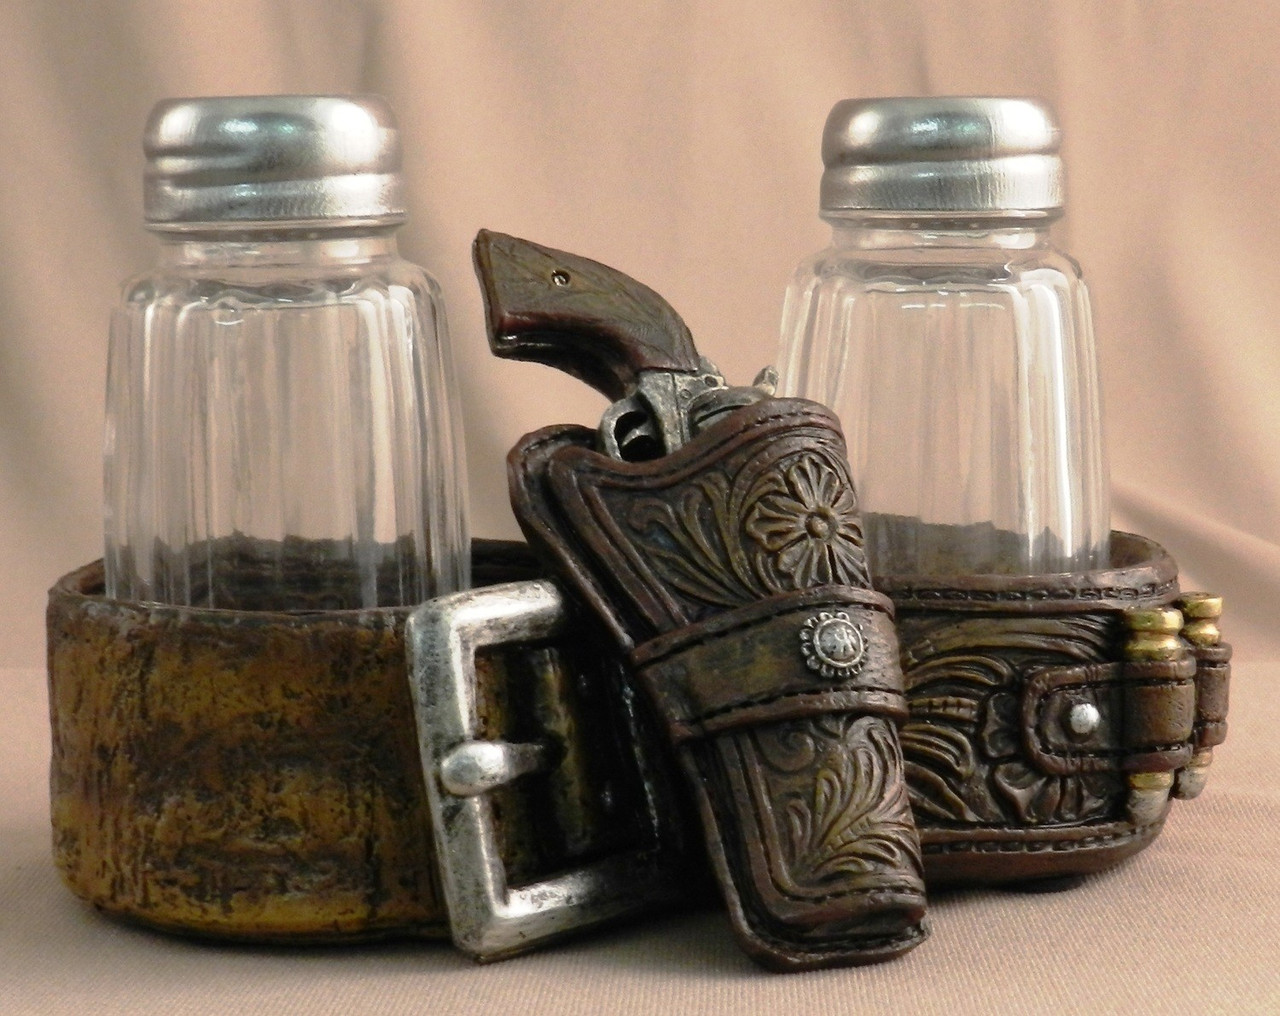  Cowboy holster and six shooter  Old West style Salt and Pepper Shaker  Table top items 